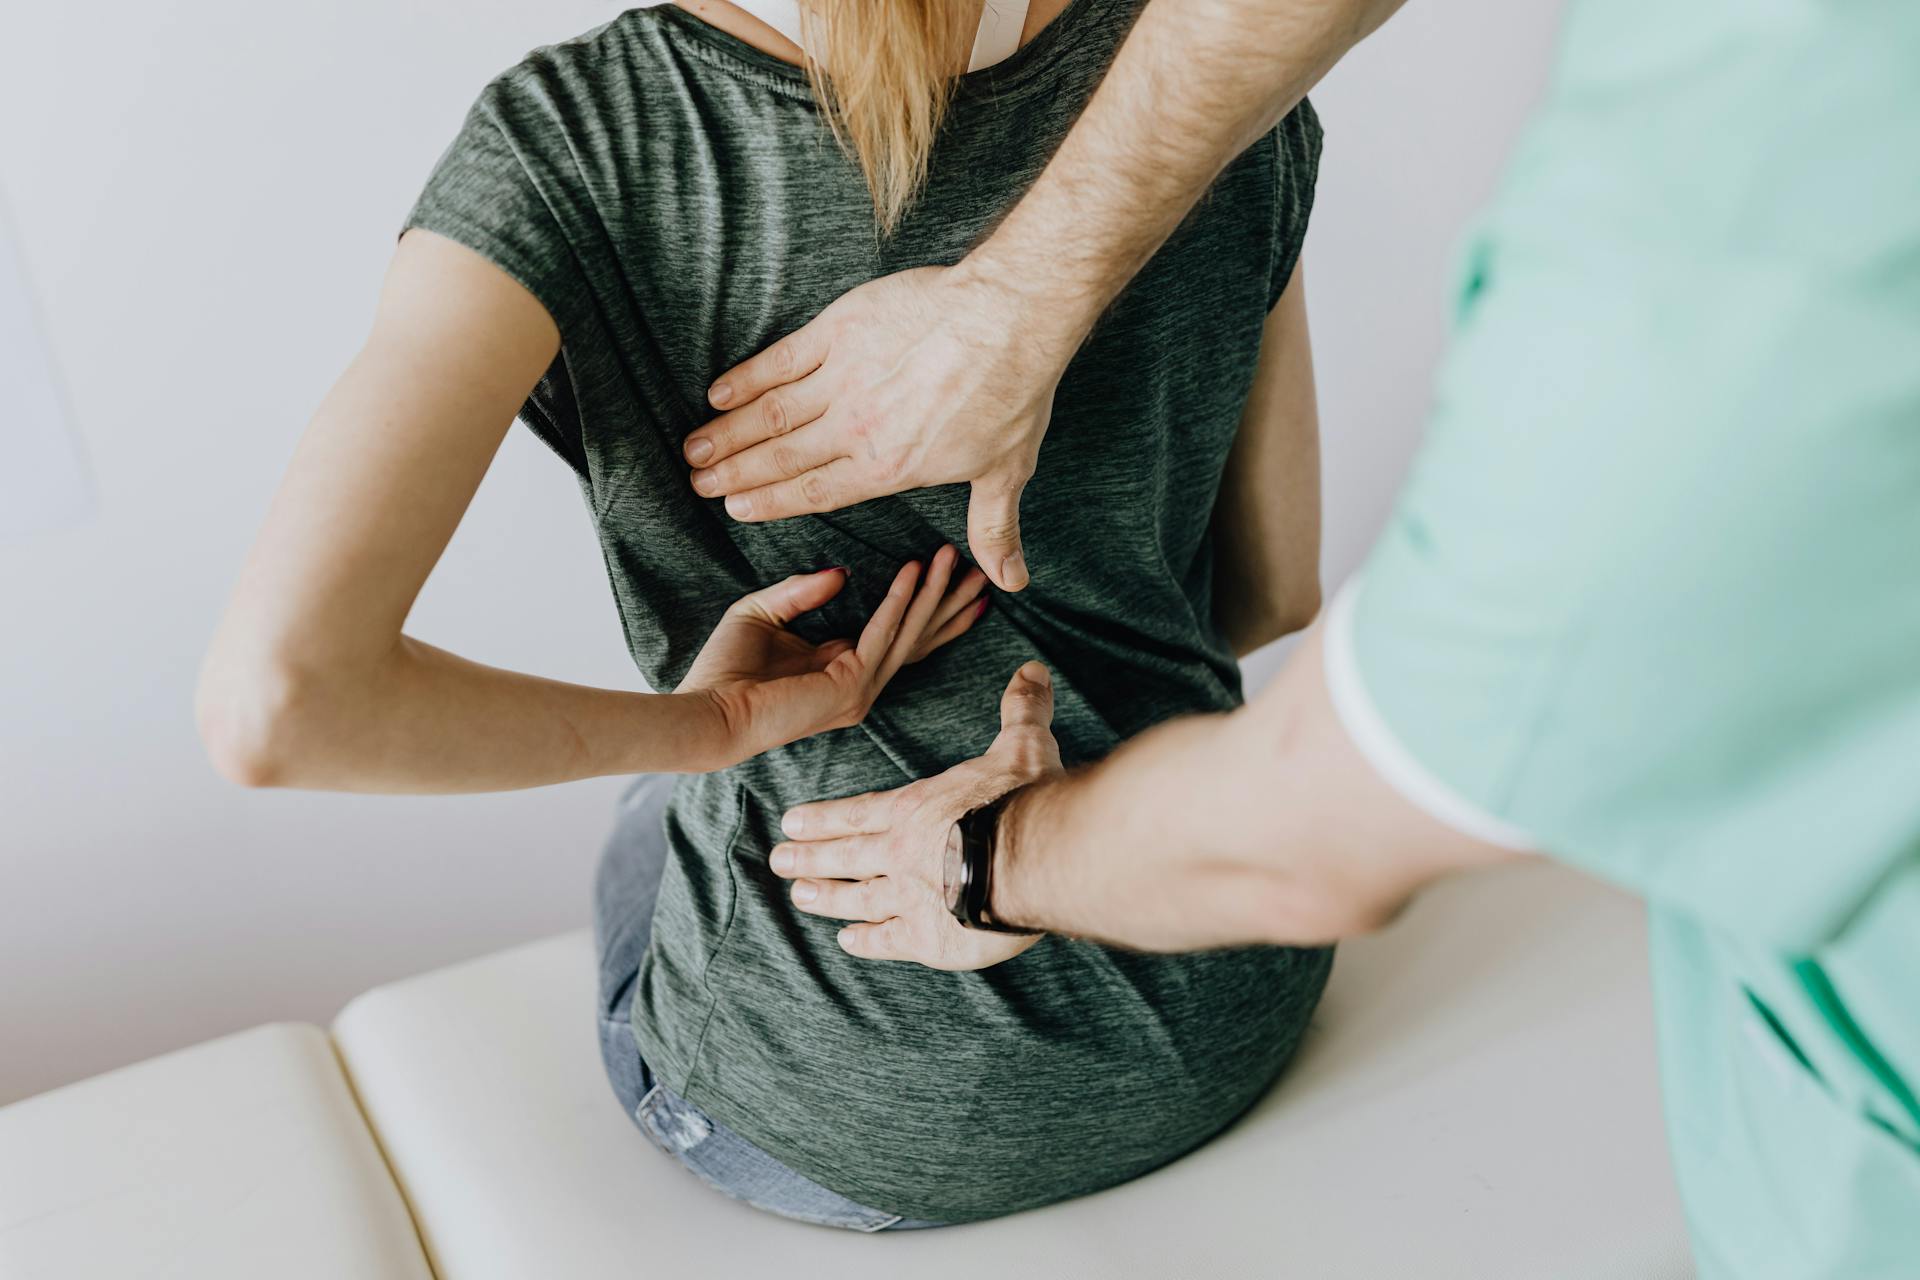 Chiropractor examining a woman's back